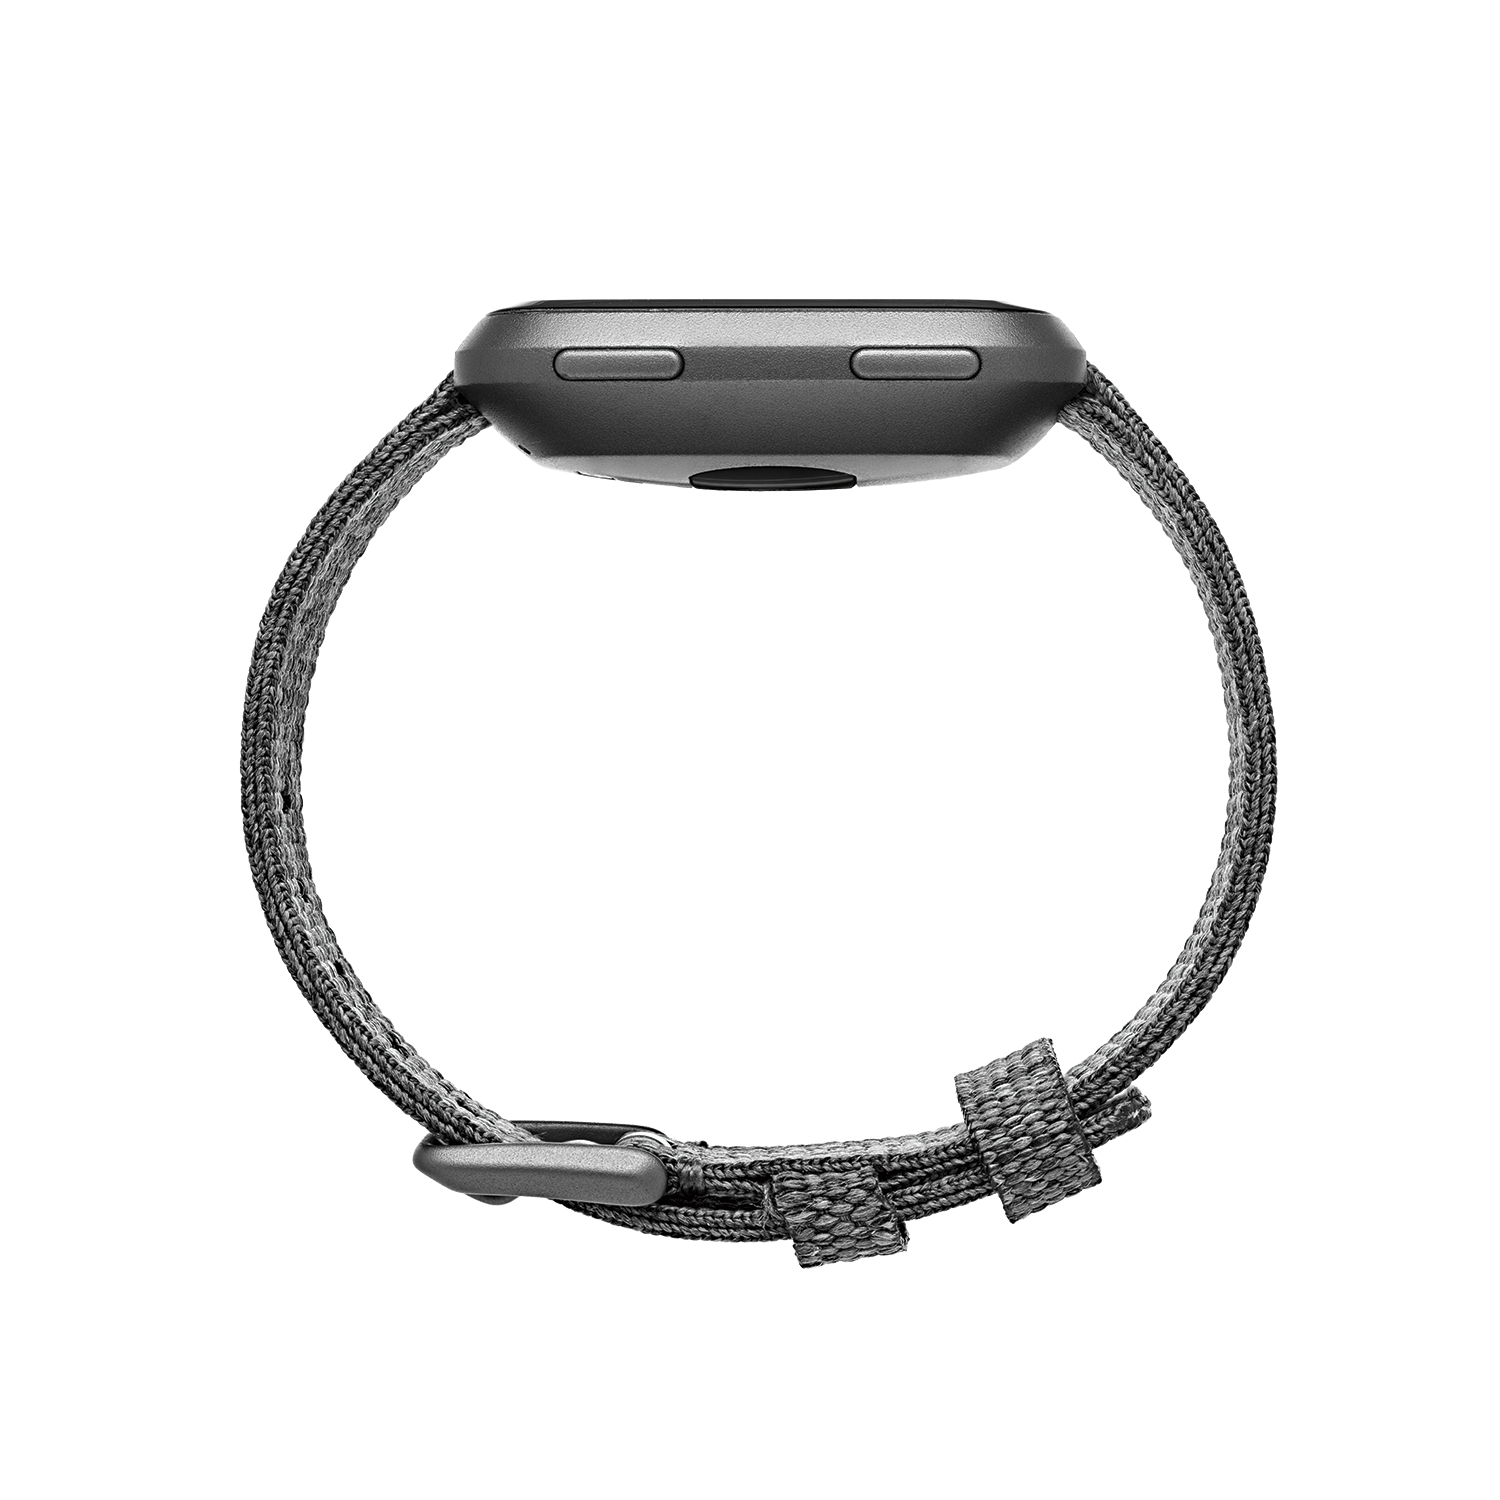 Fitbit Versa - Special Edition Smart Watch - image 4 of 6